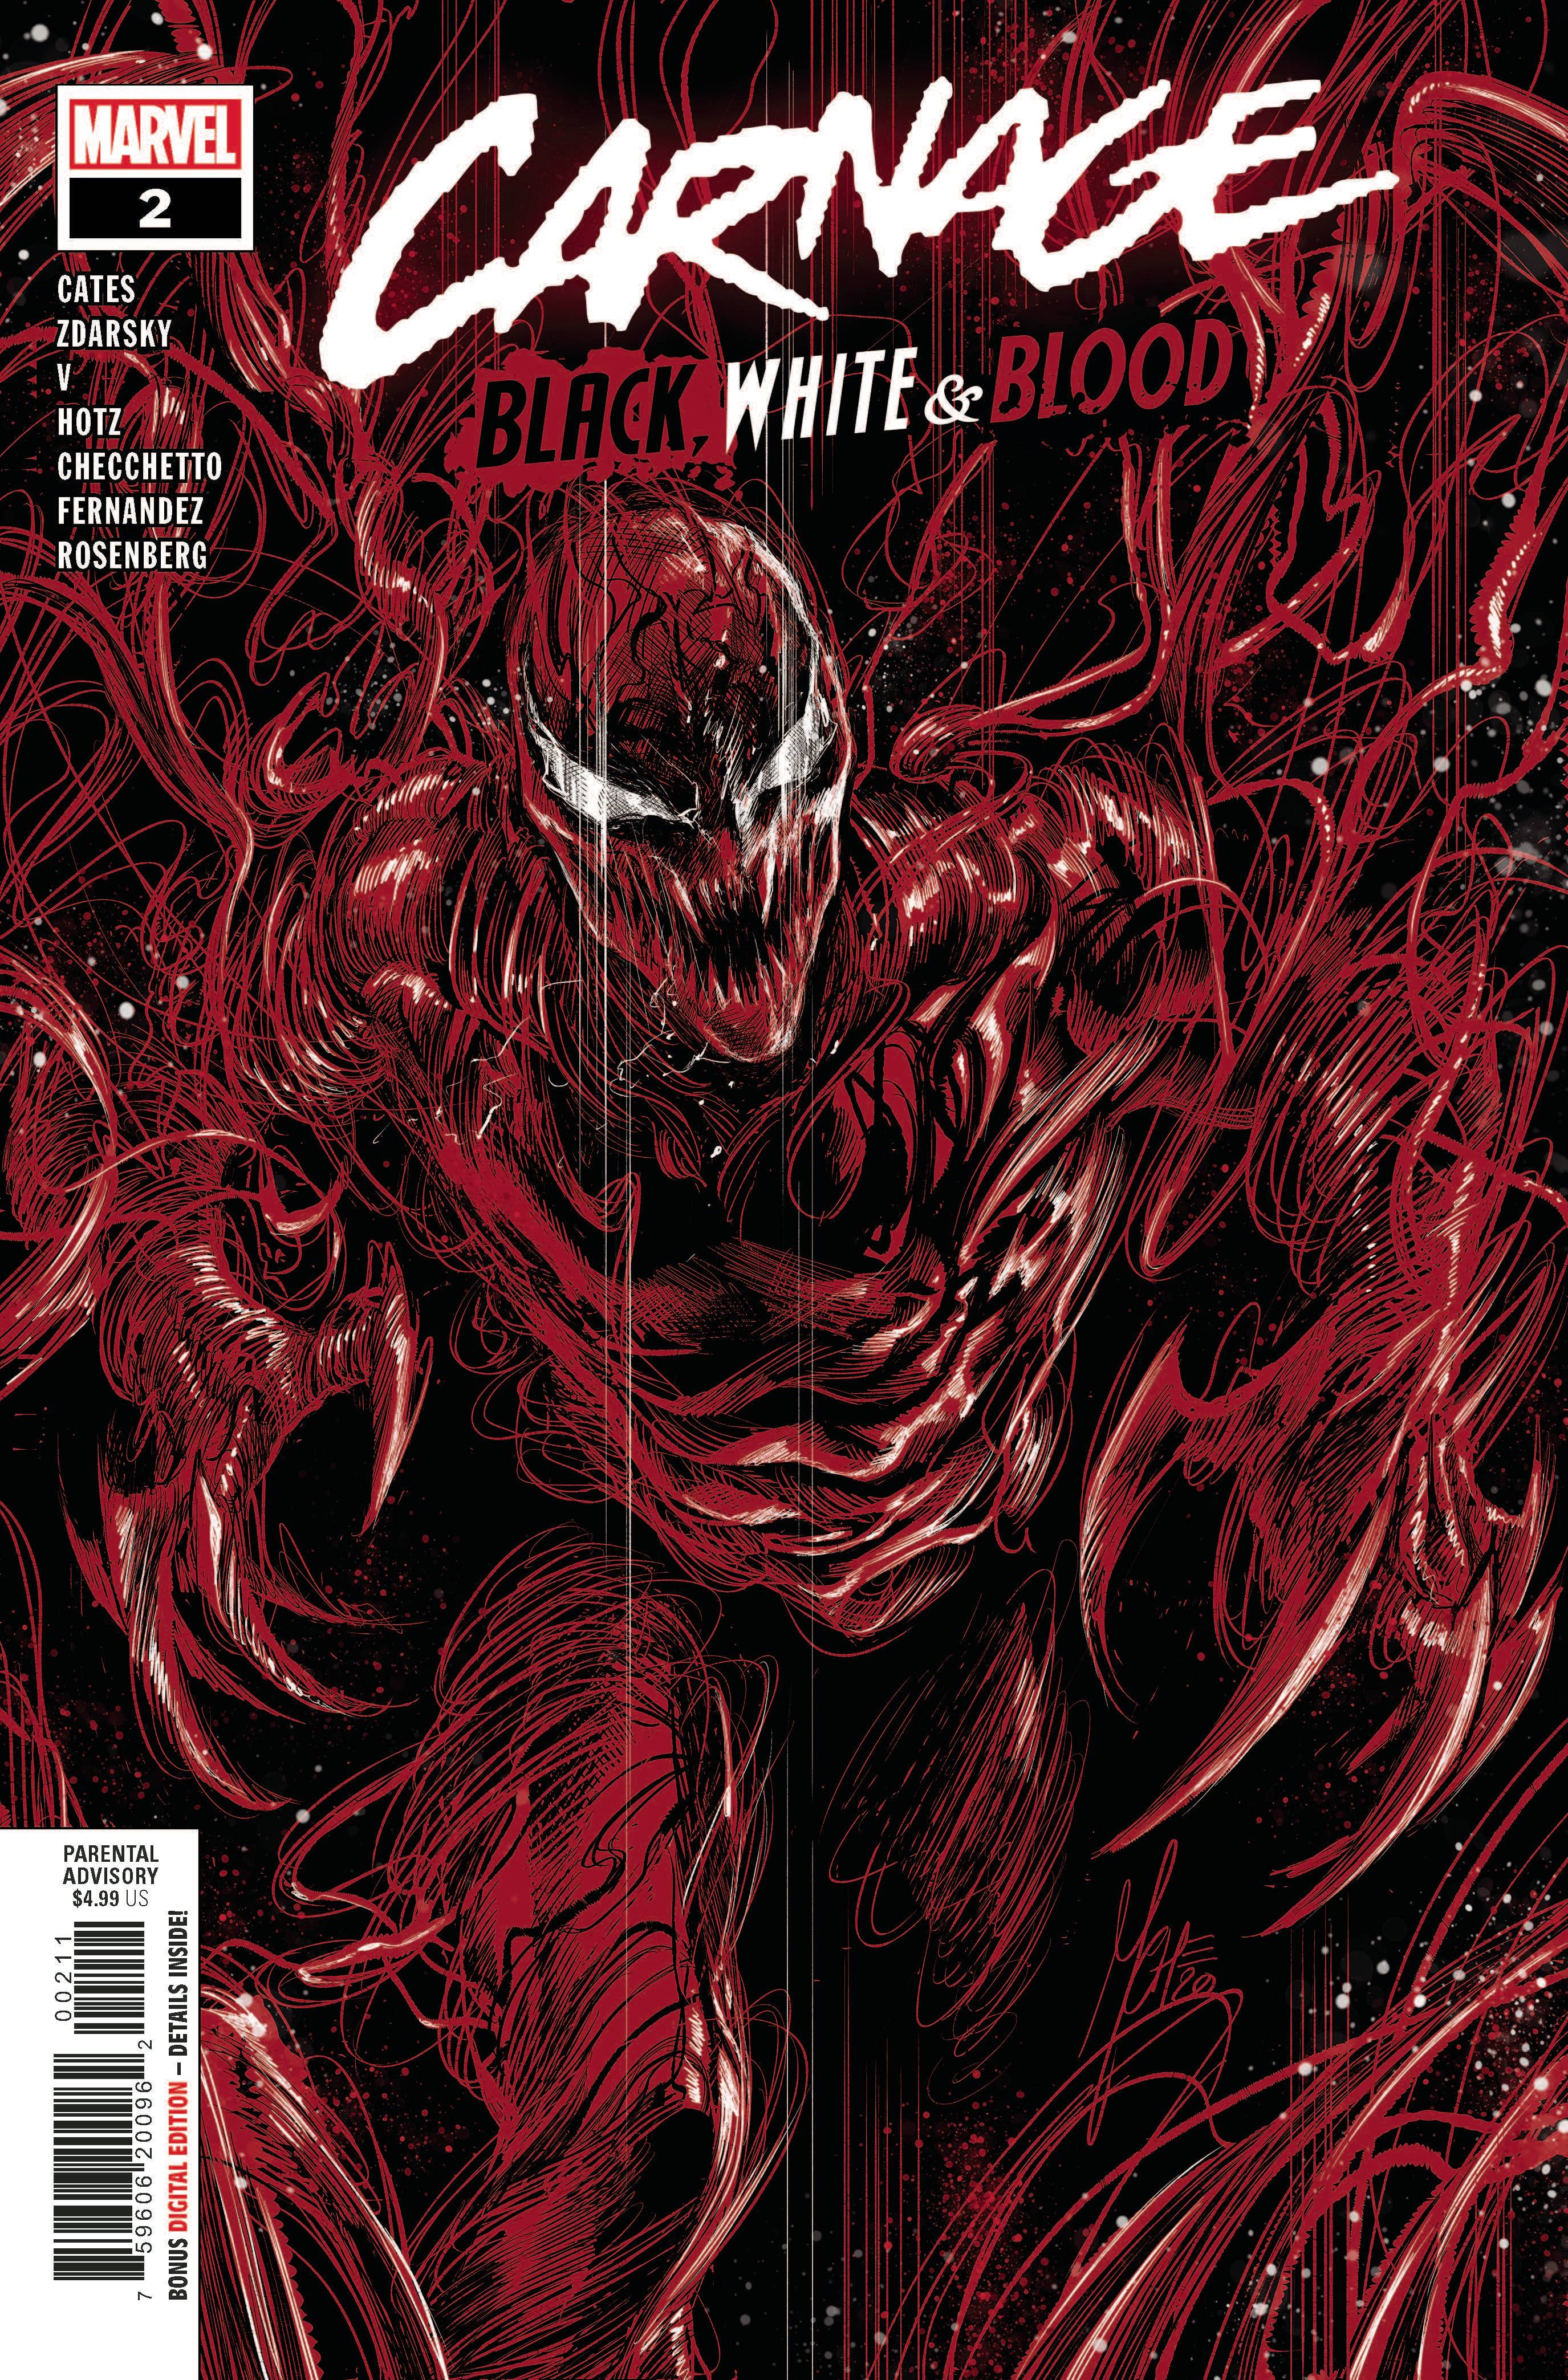 CARNAGE BLACK WHITE AND BLOOD #2 (OF 4) | Game Master's Emporium (The New GME)